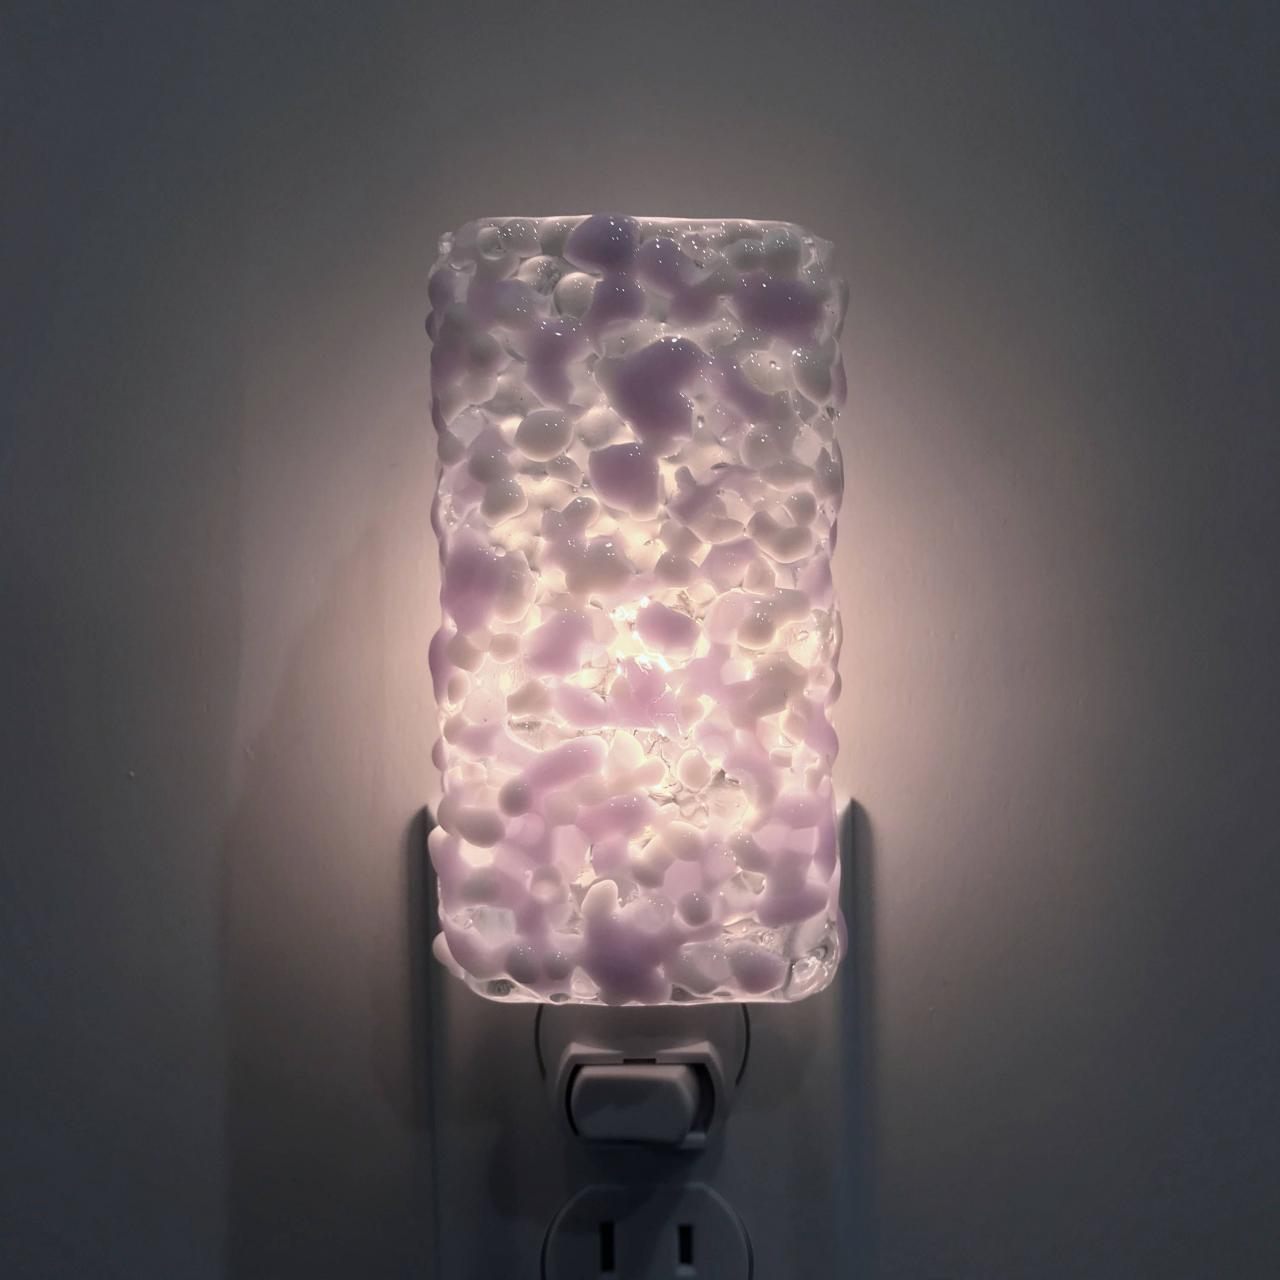 Glass Night Light Purple and White Fused Glass, Kitchen or Bathroom